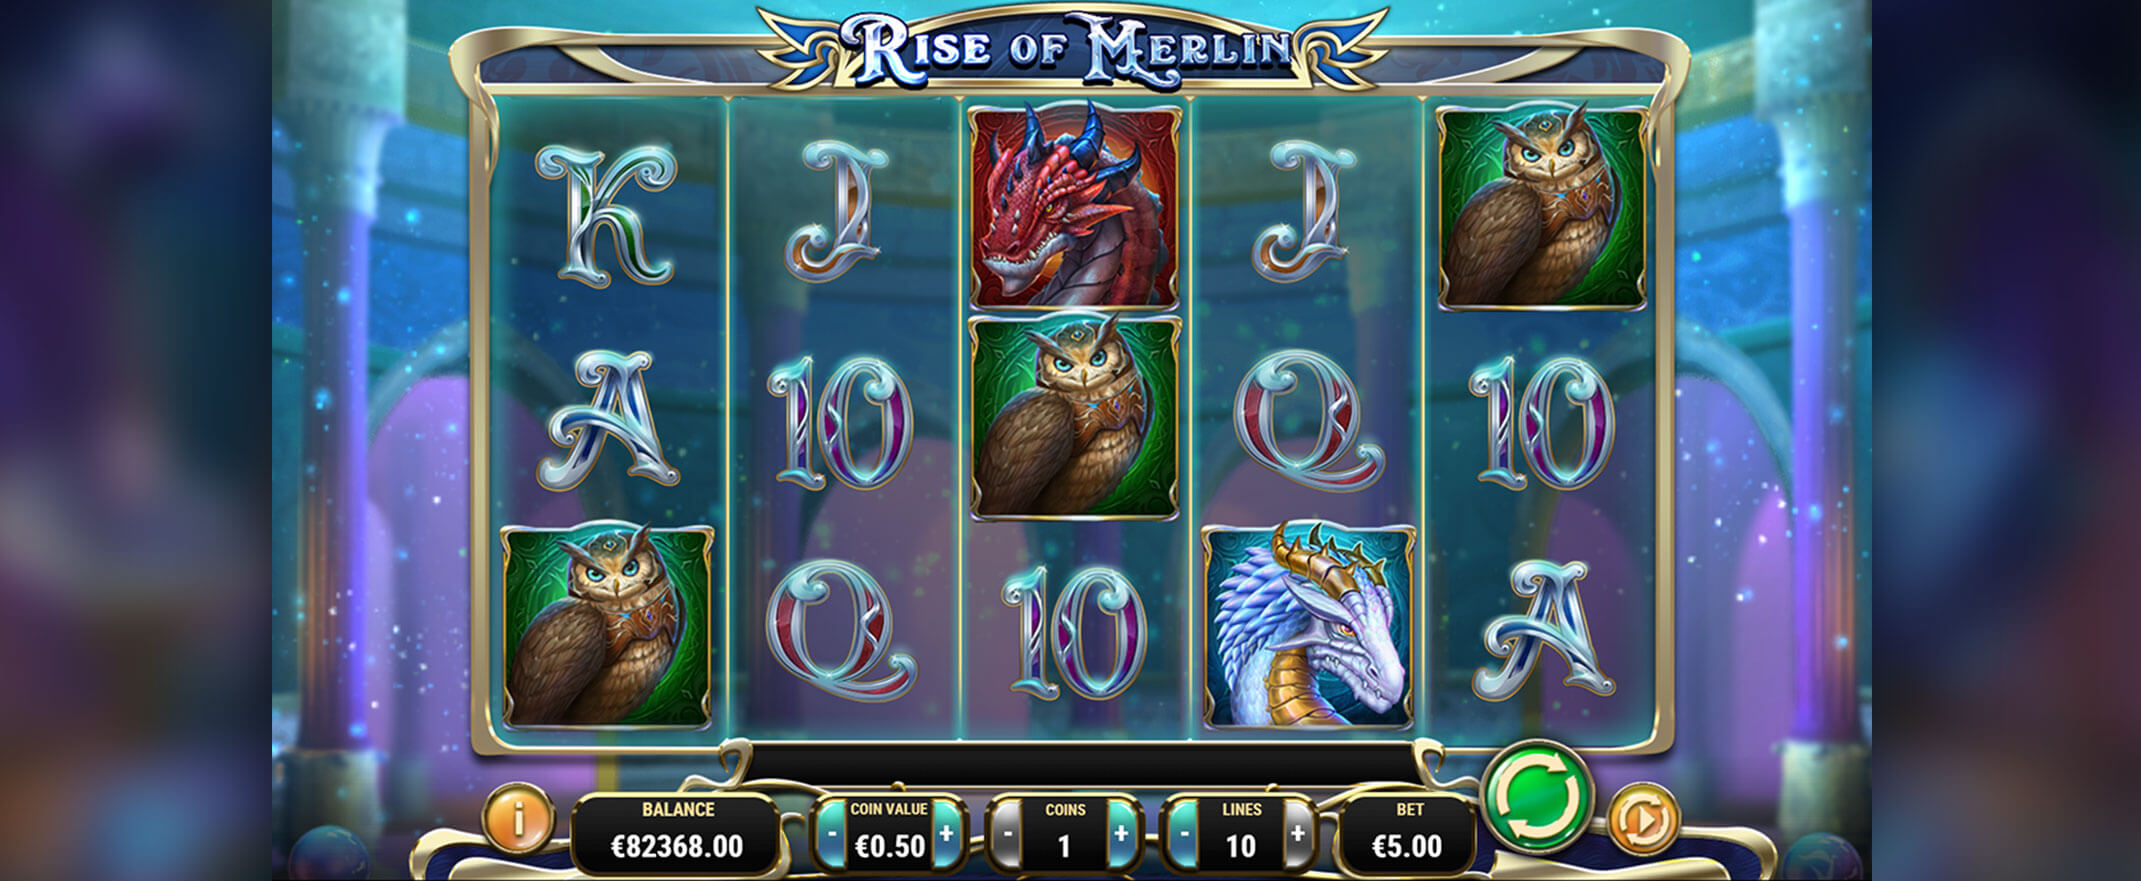 Rise of Merlin video slot from Play N Go